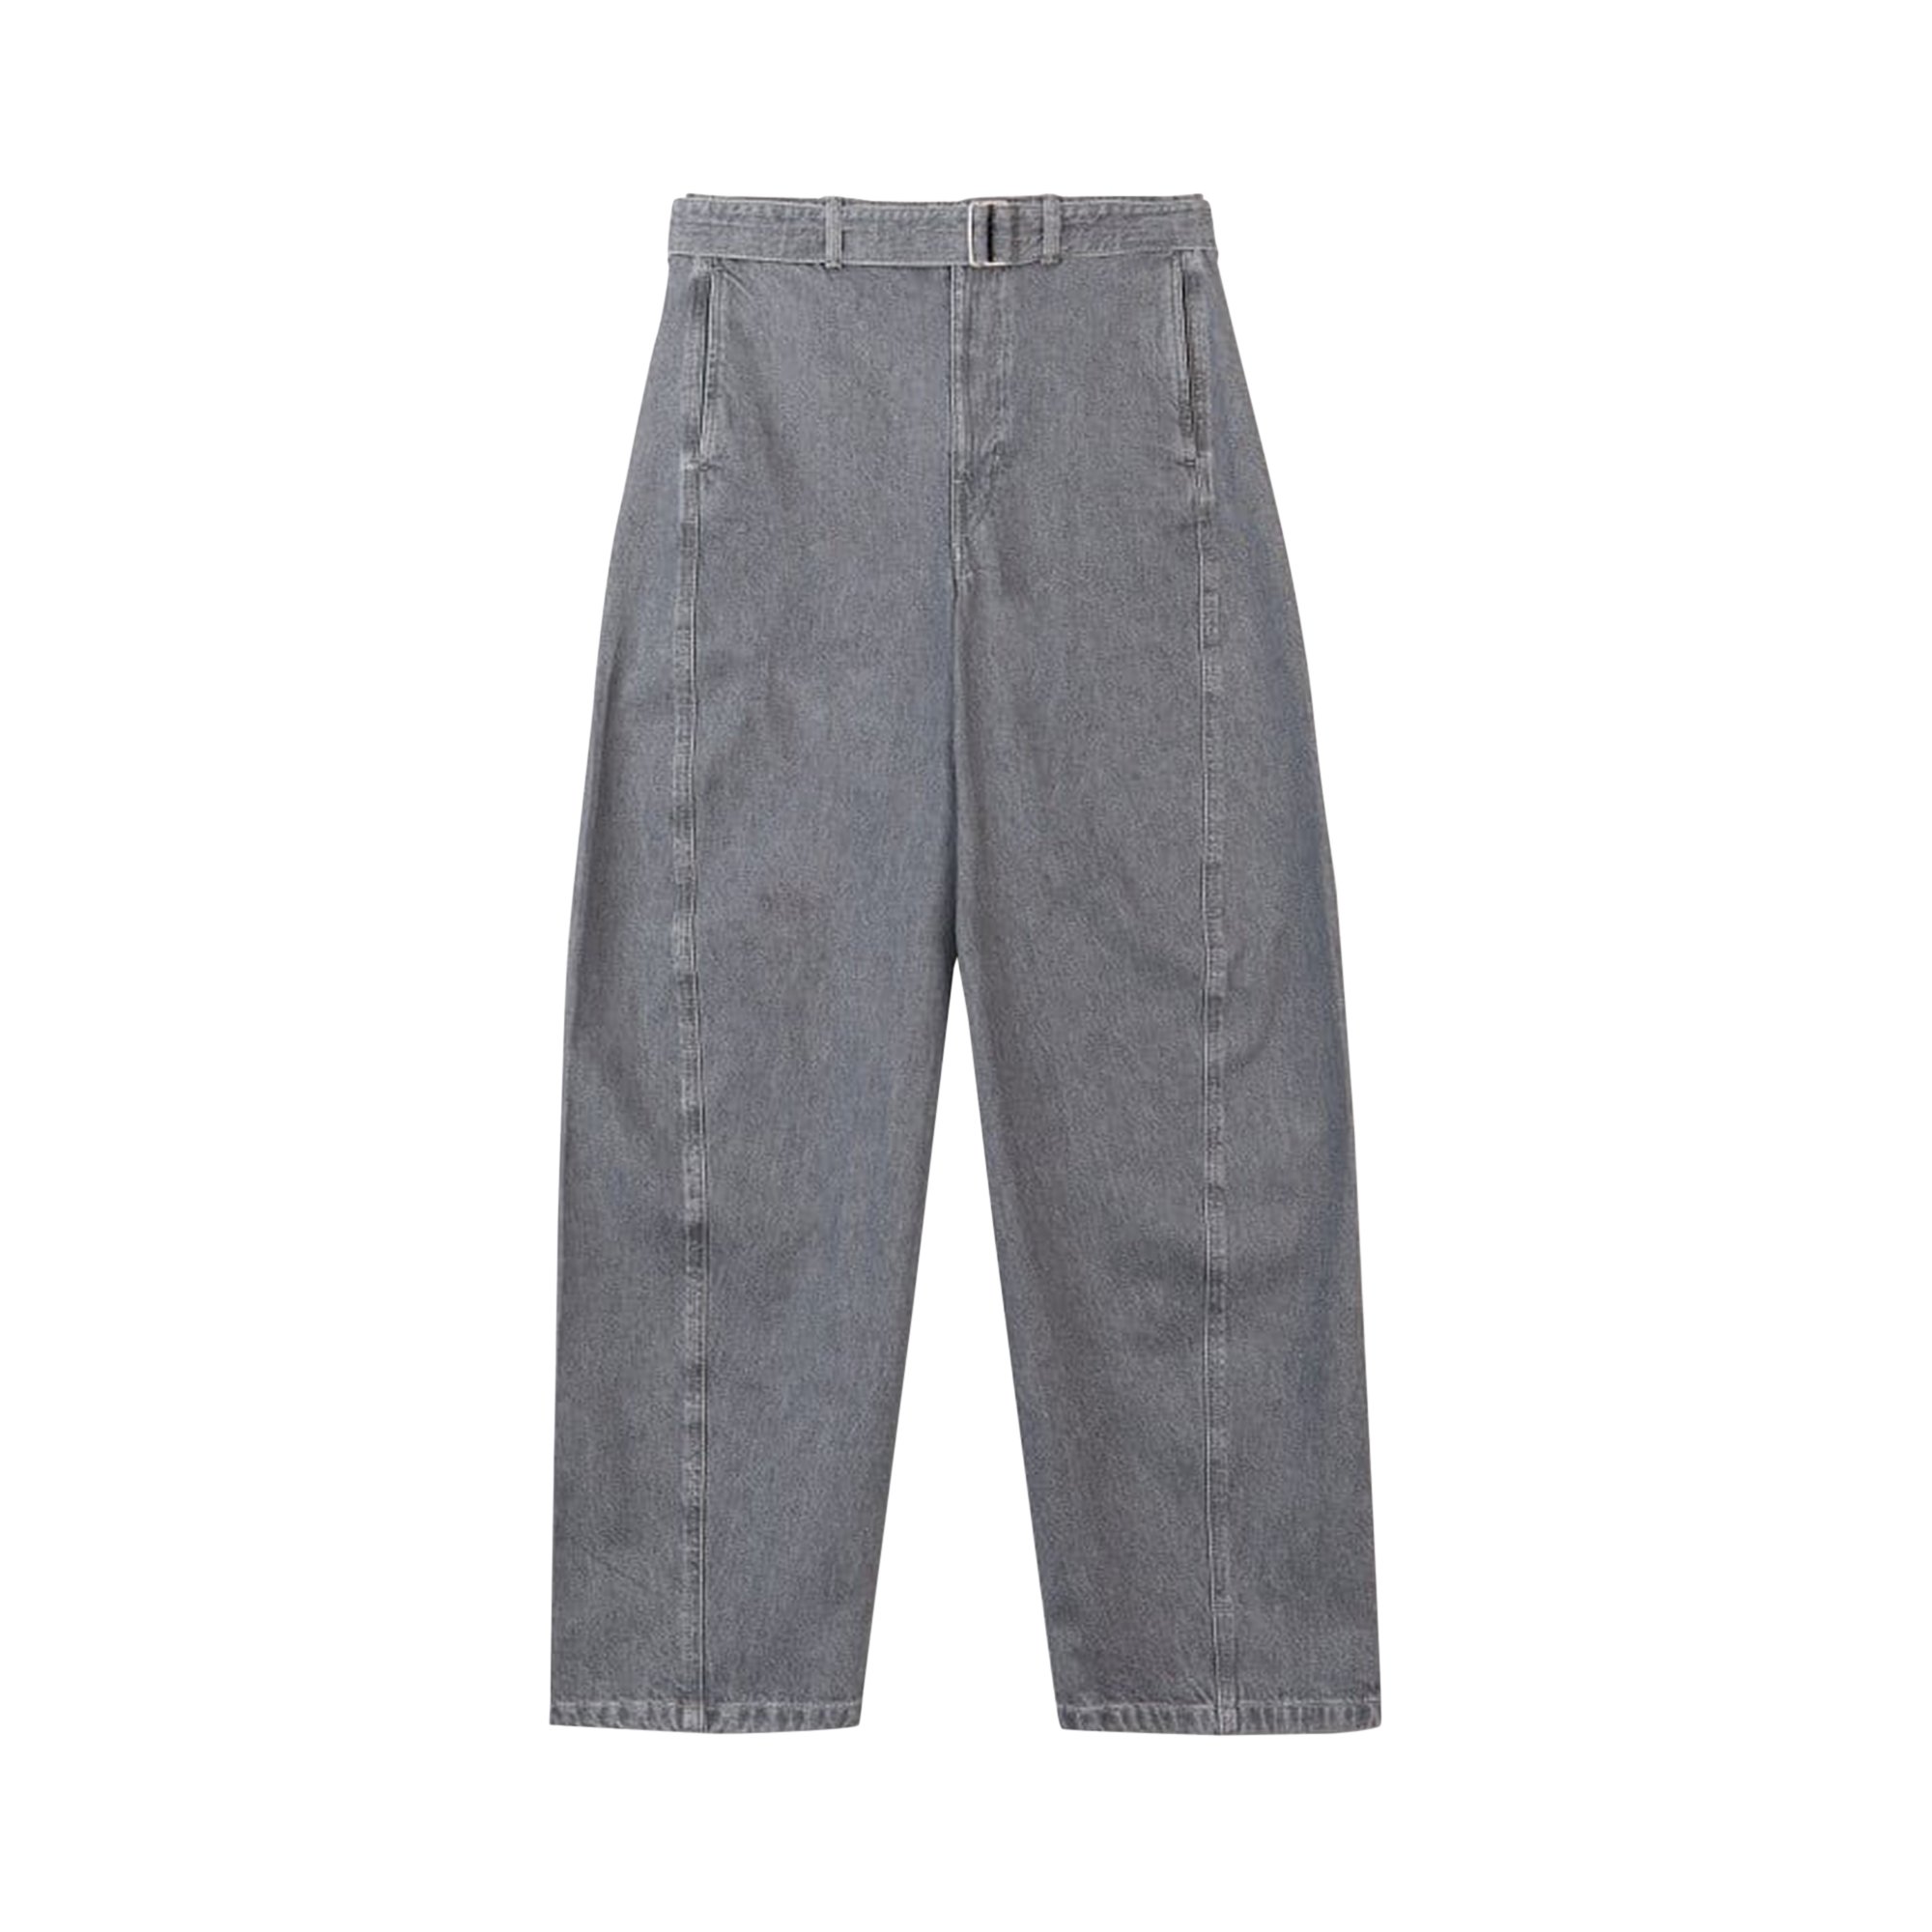 Buy Lemaire Twisted Belted Pants 'Denim Stone Grey' - X 221 PA302 ...